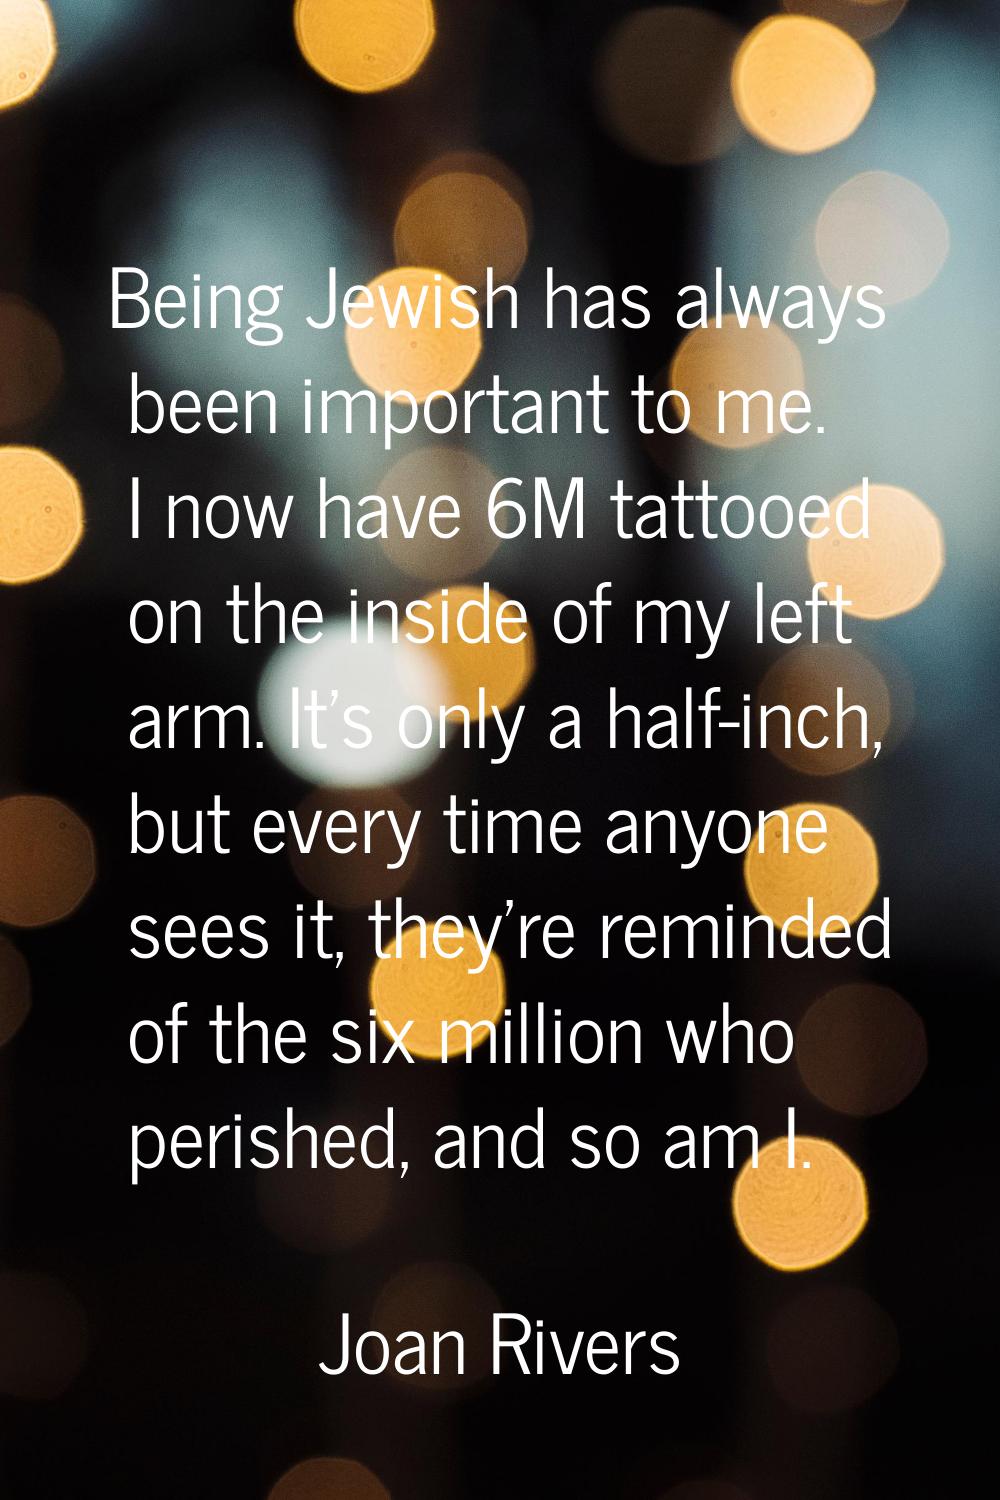 Being Jewish has always been important to me. I now have 6M tattooed on the inside of my left arm. 